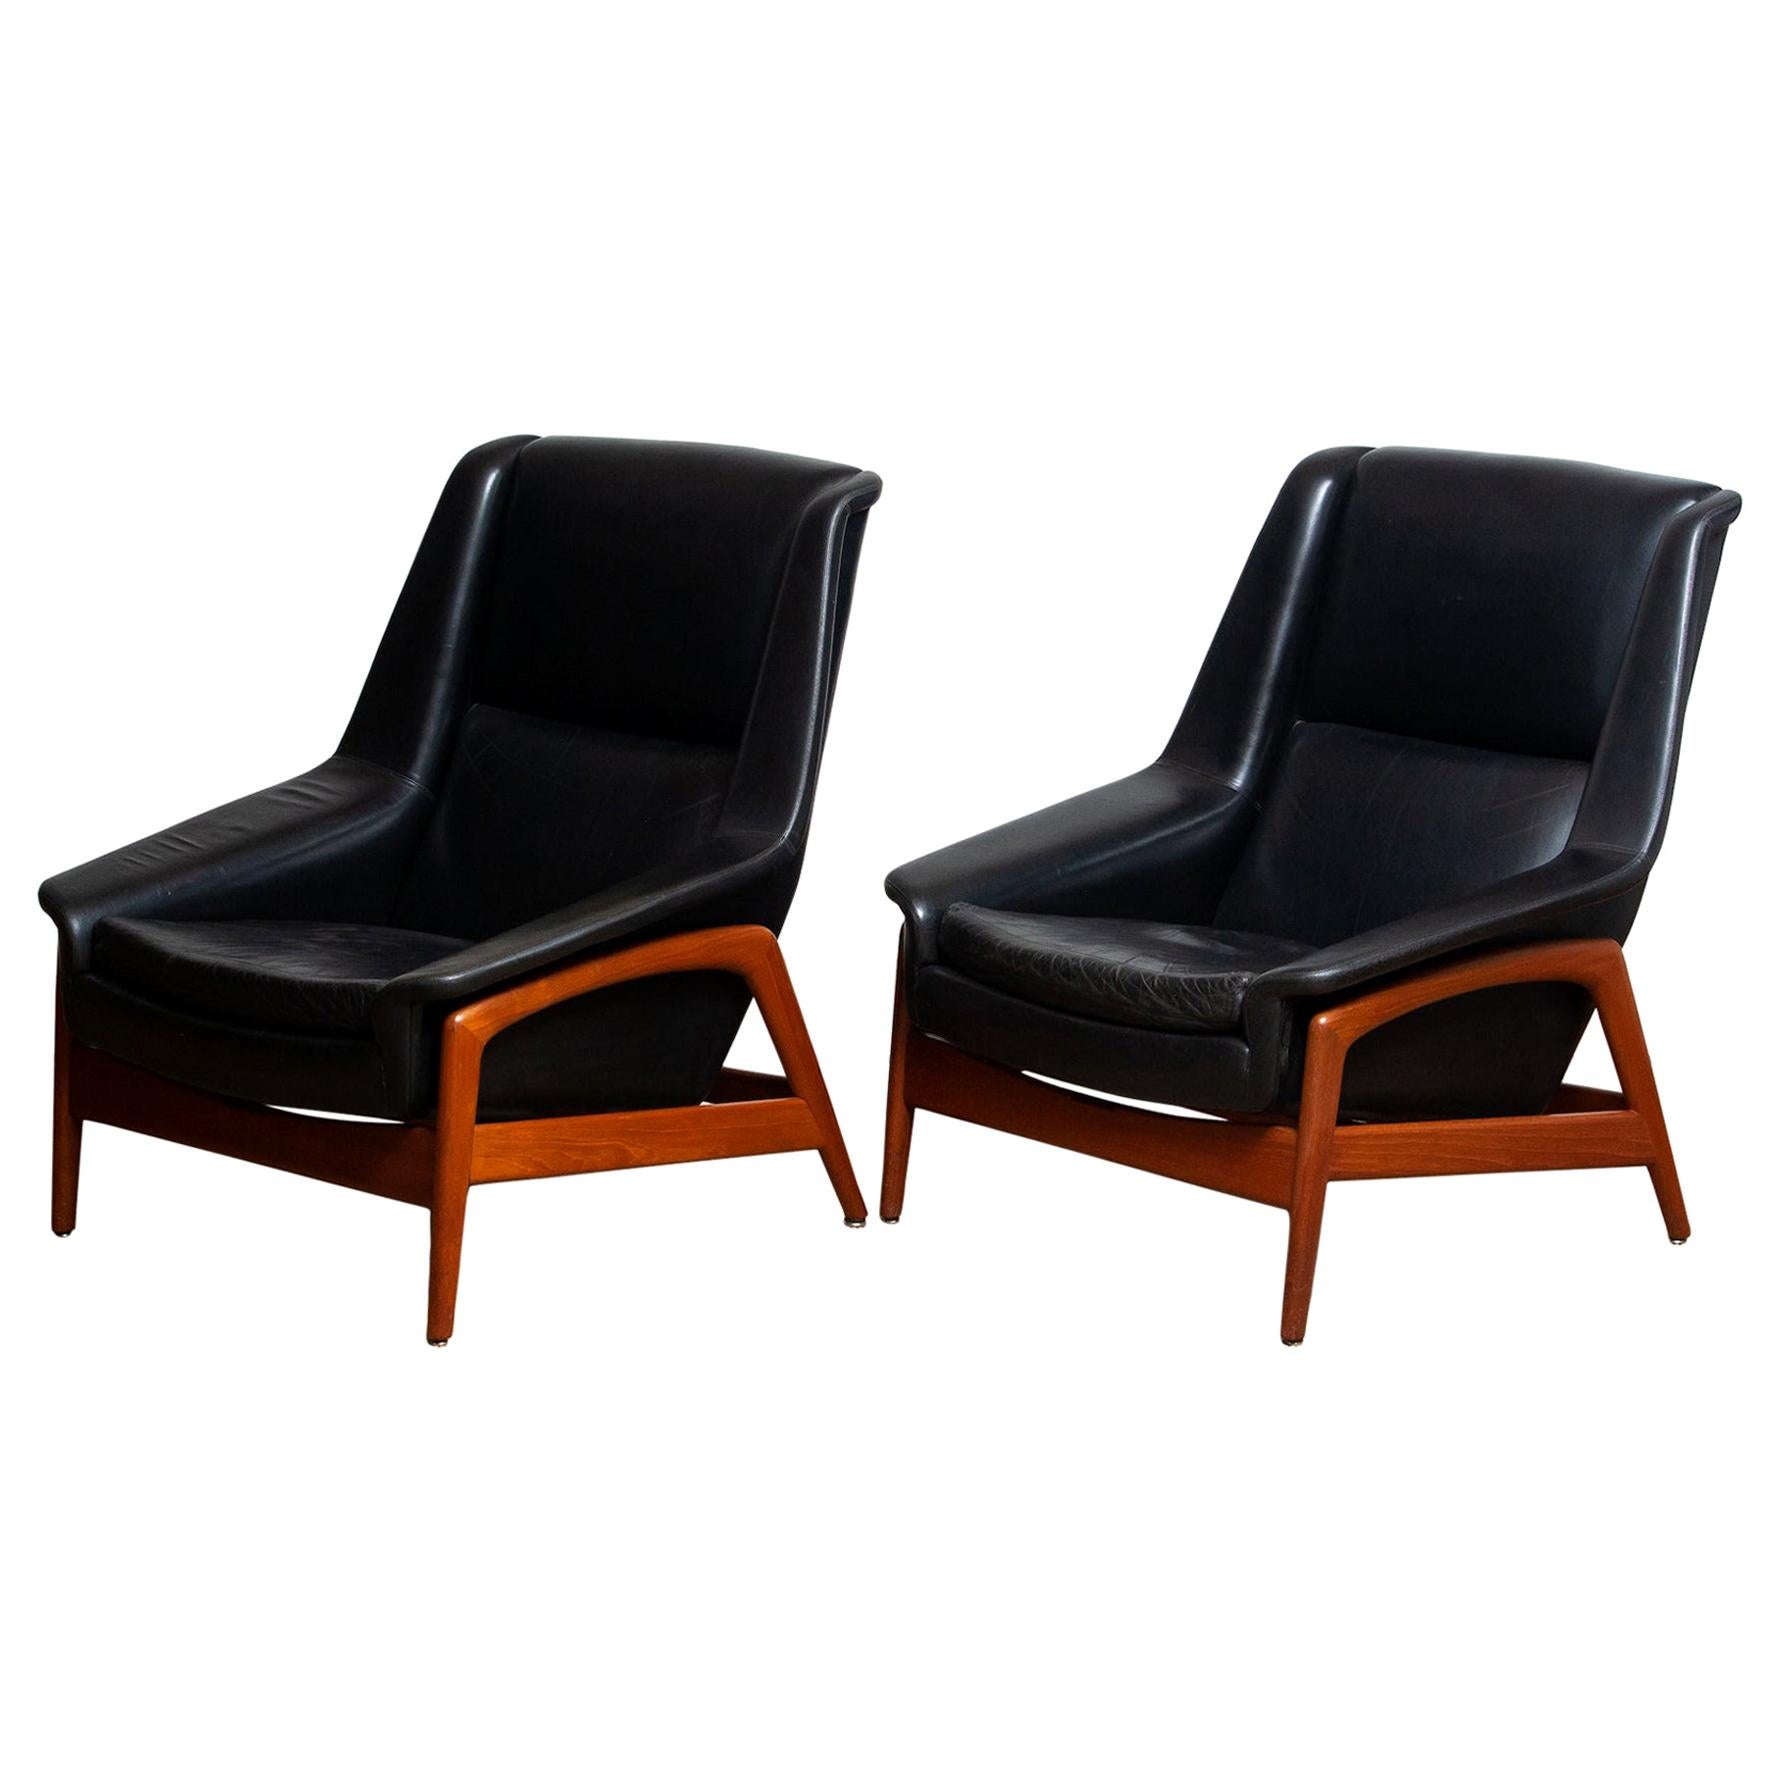 1960s Pair of Lounge Chairs 'Profil', Folke Ohlsson for DUX in Leather and Teak